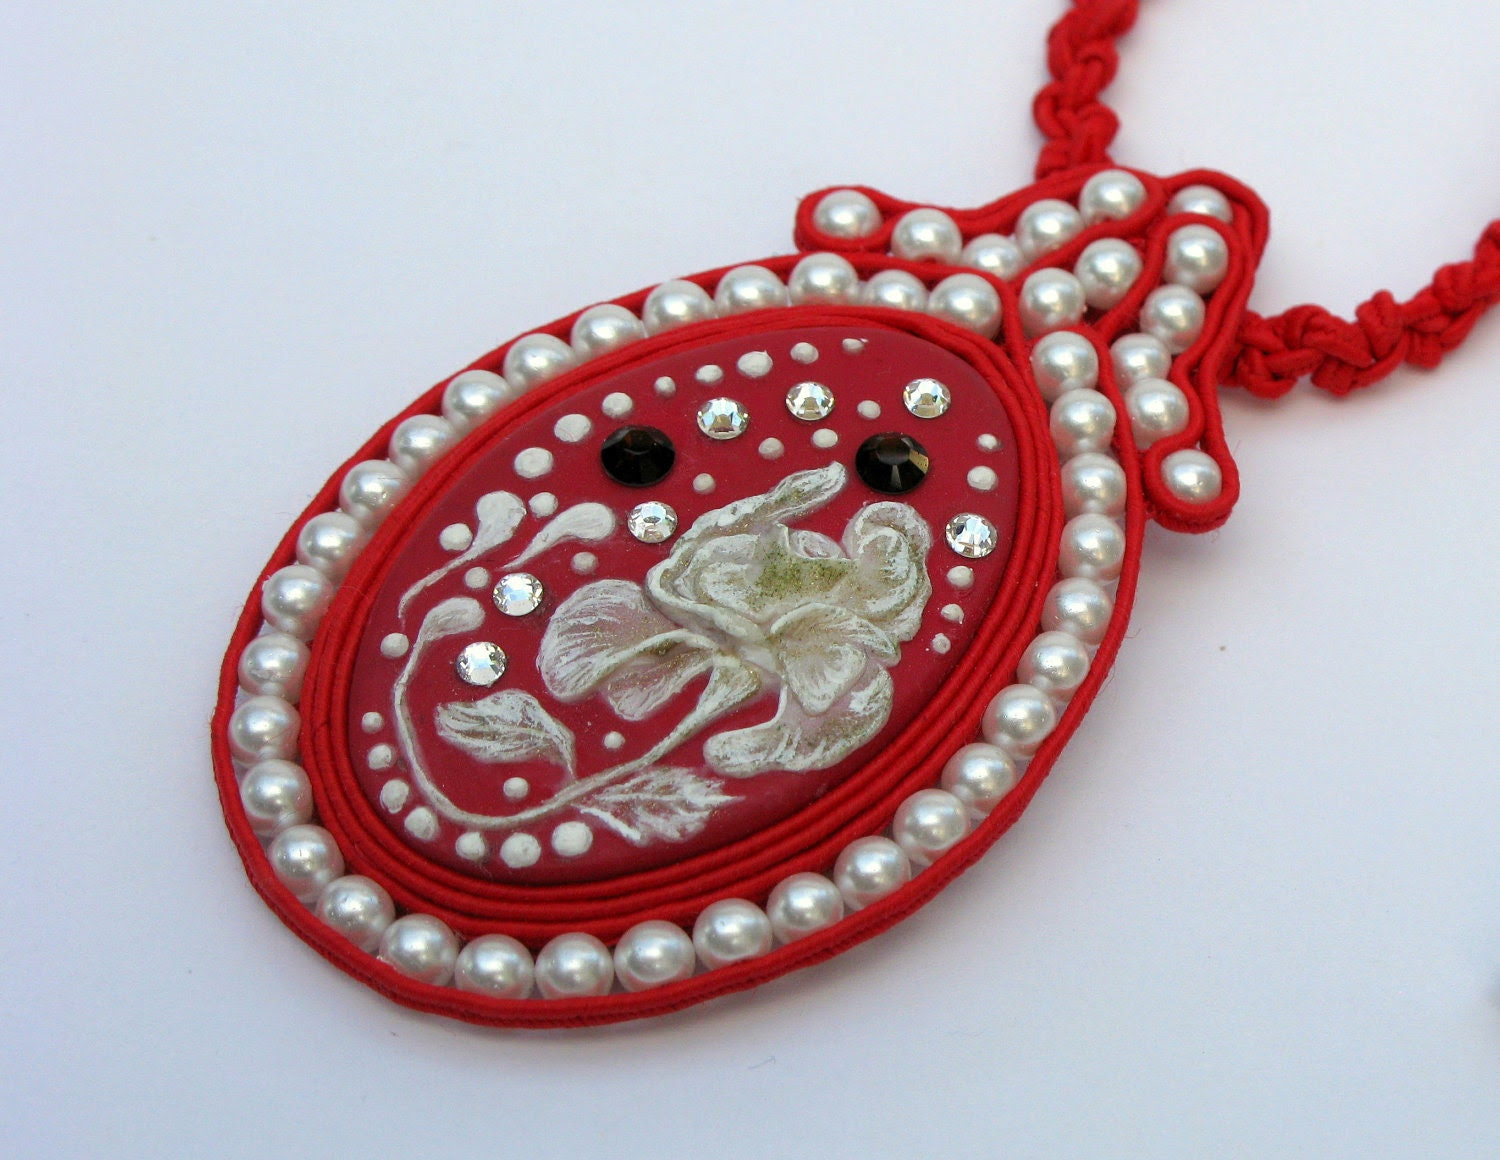 beaded soutache polymer clay necklace with Swarovski crystals and pearls - absolutelynailart